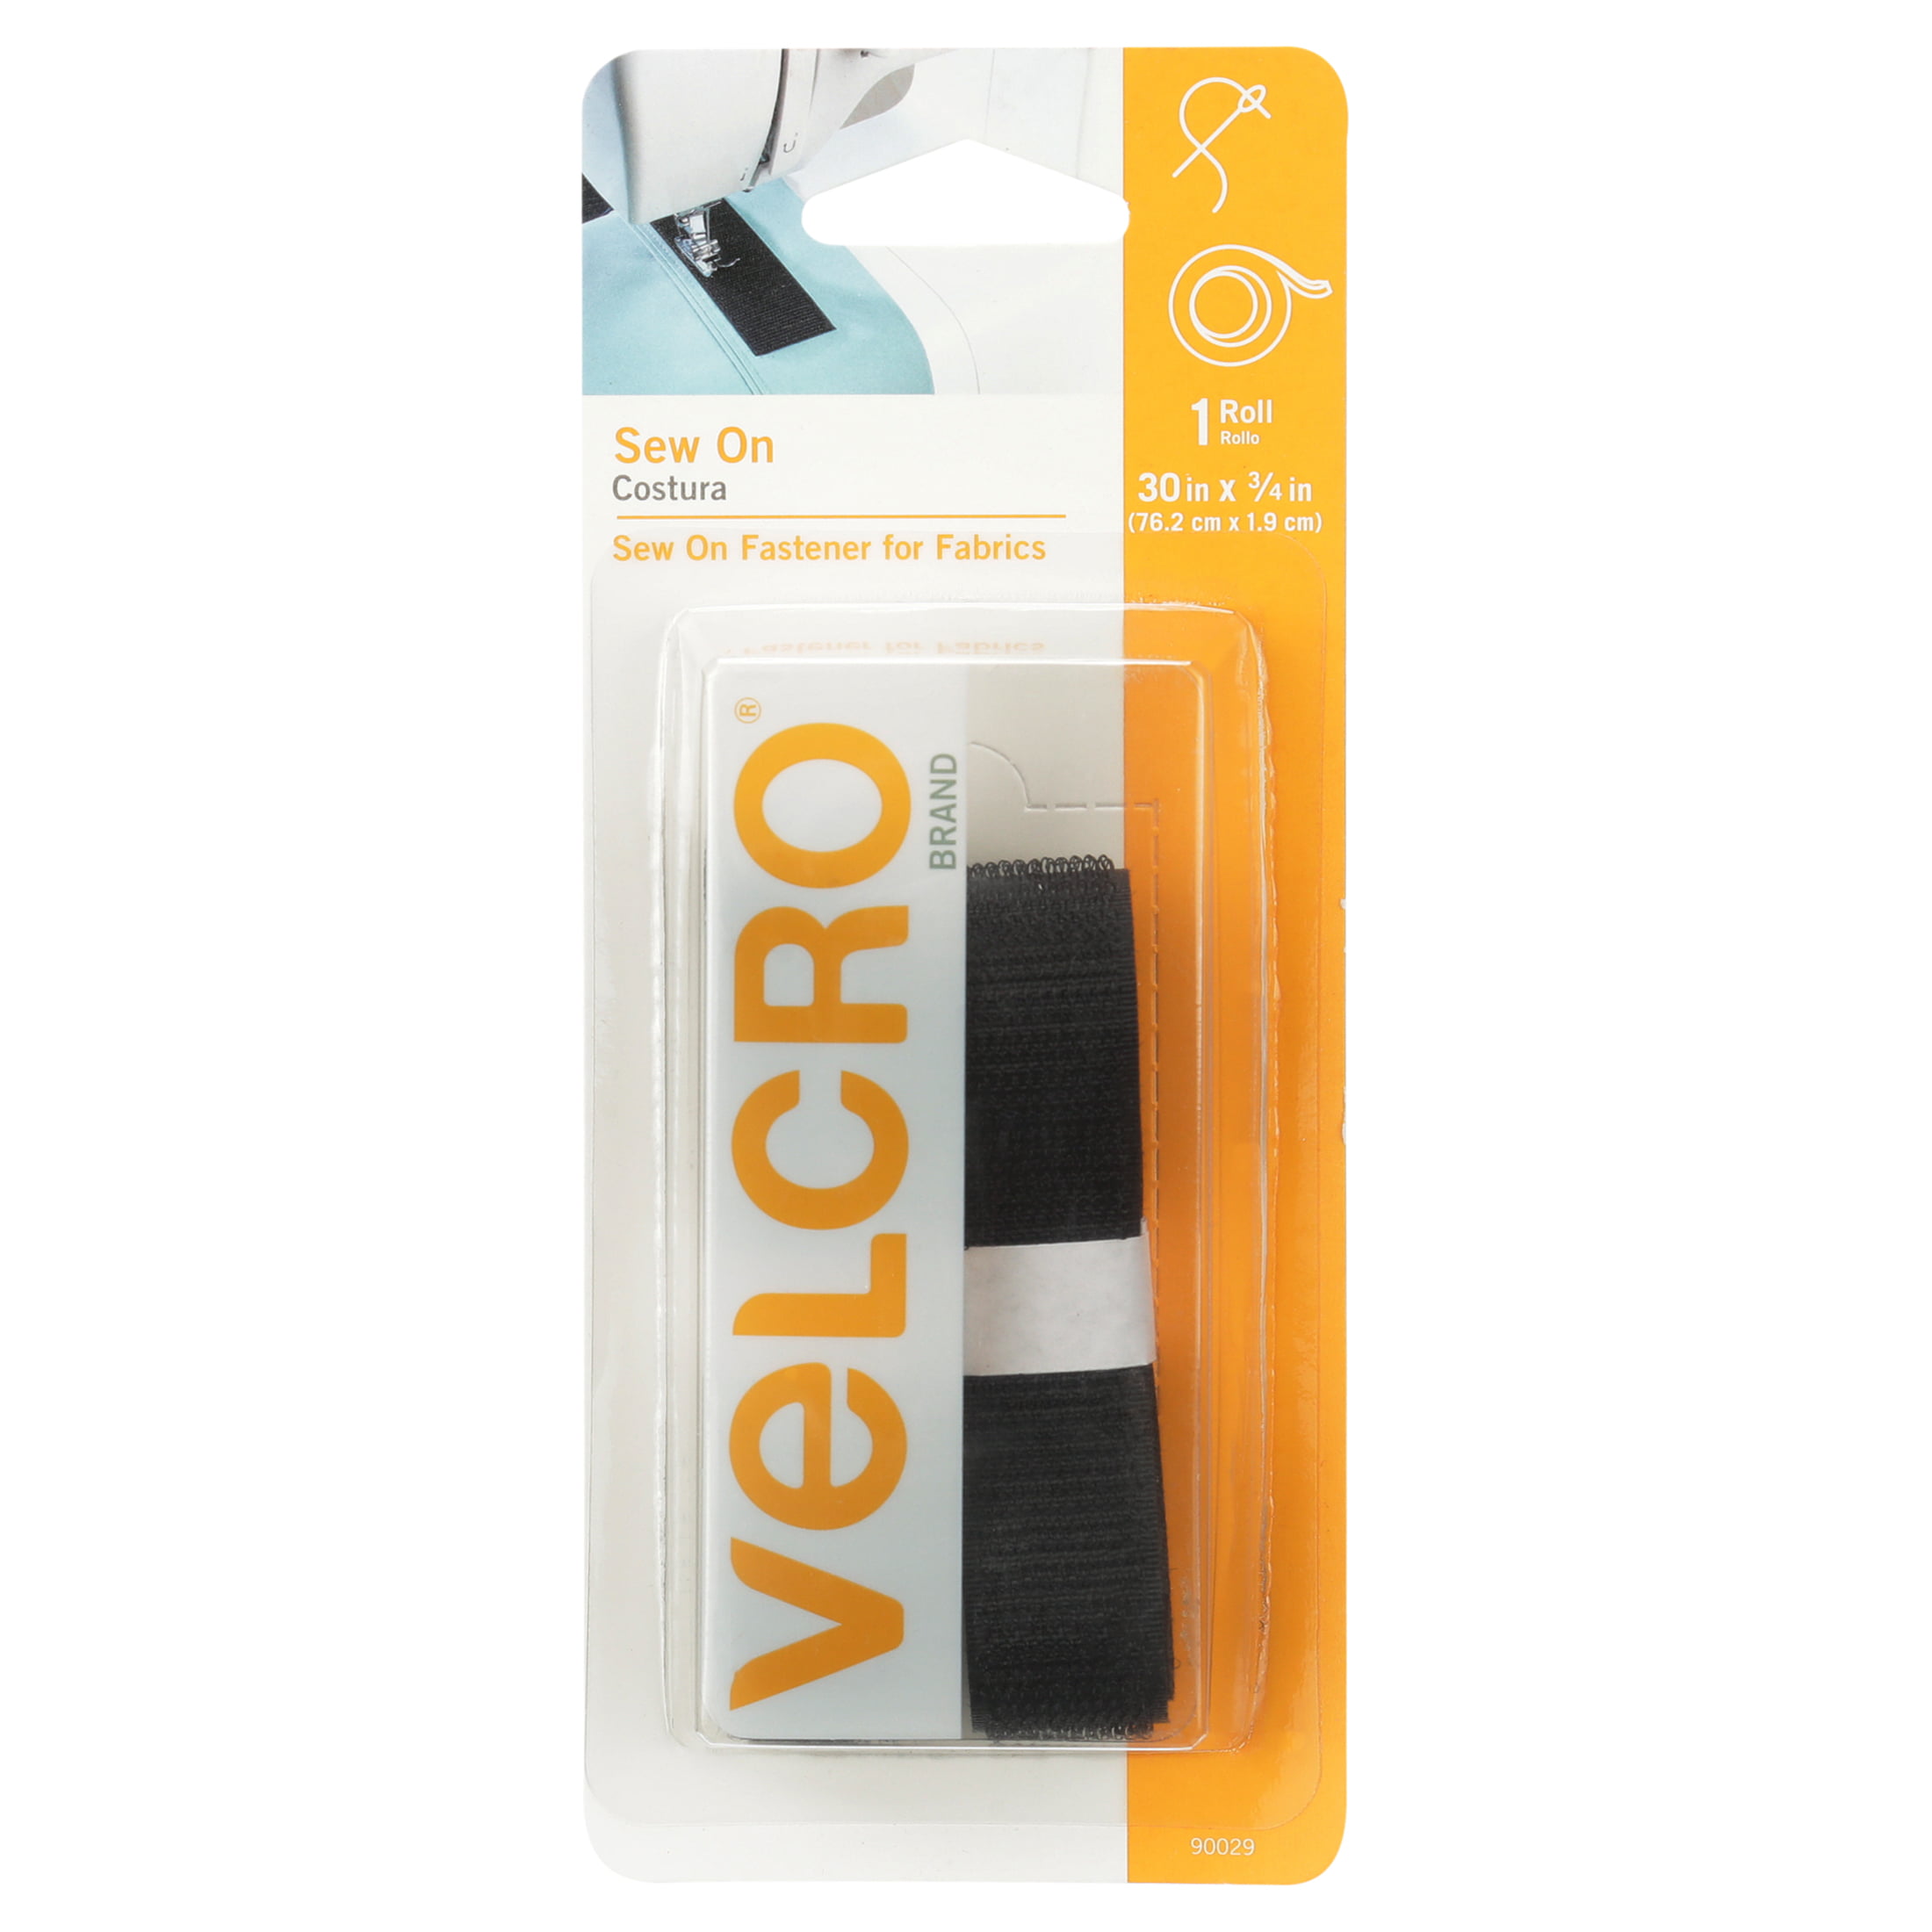 VELCRO Brand for Fabrics Pre-Cut Strips 1 x 3/4 inch No Sewing or Gluing Black Iron On Tape for Alterations and Hemming Heat Activated for Thicker Fabrics 